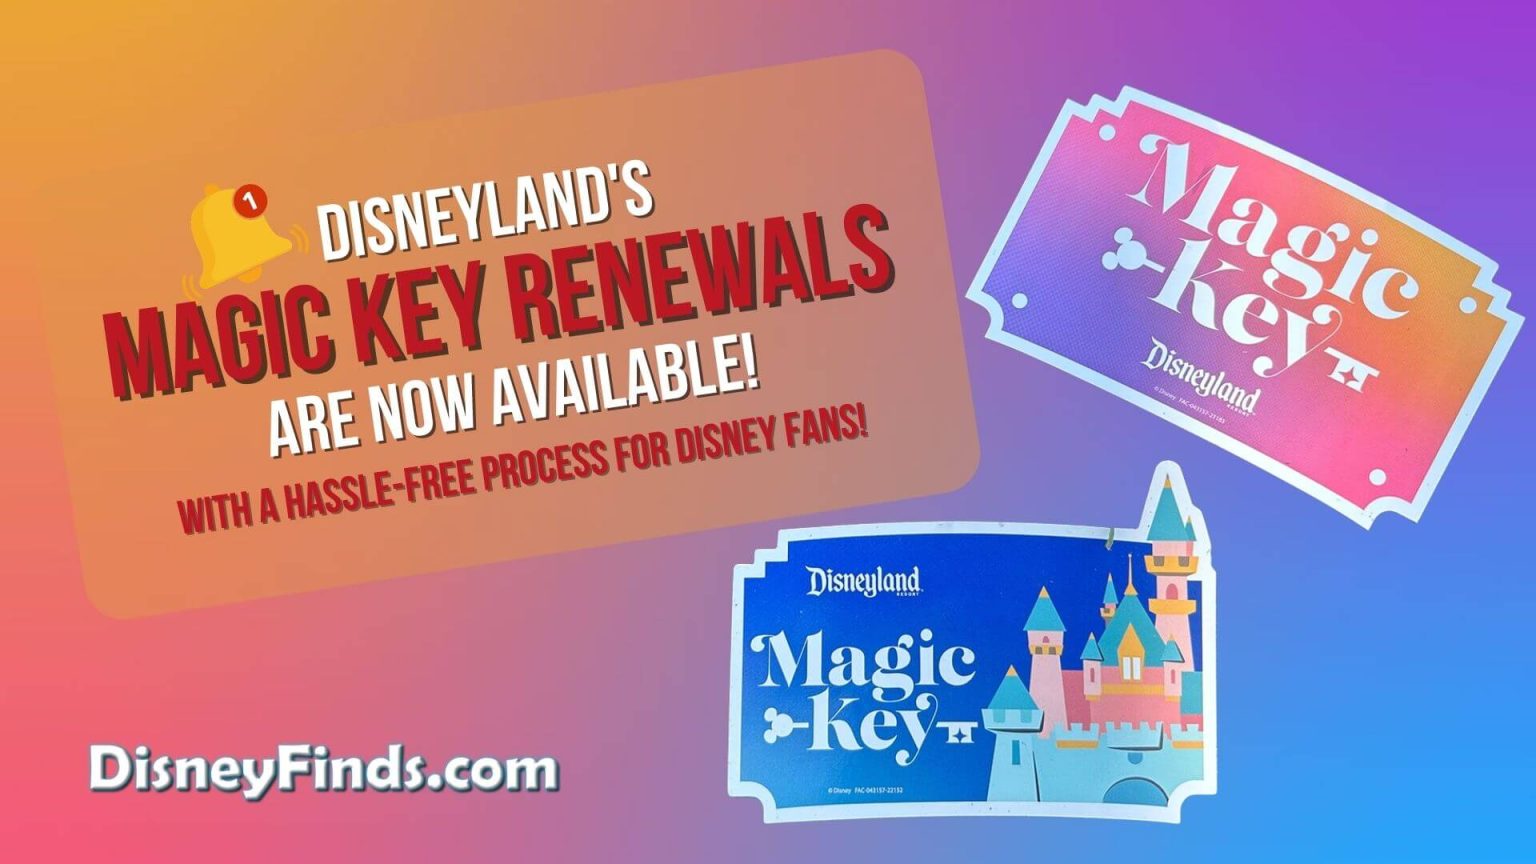 Disney’s Magic Key Renewals Are Now Available HassleFree Process for